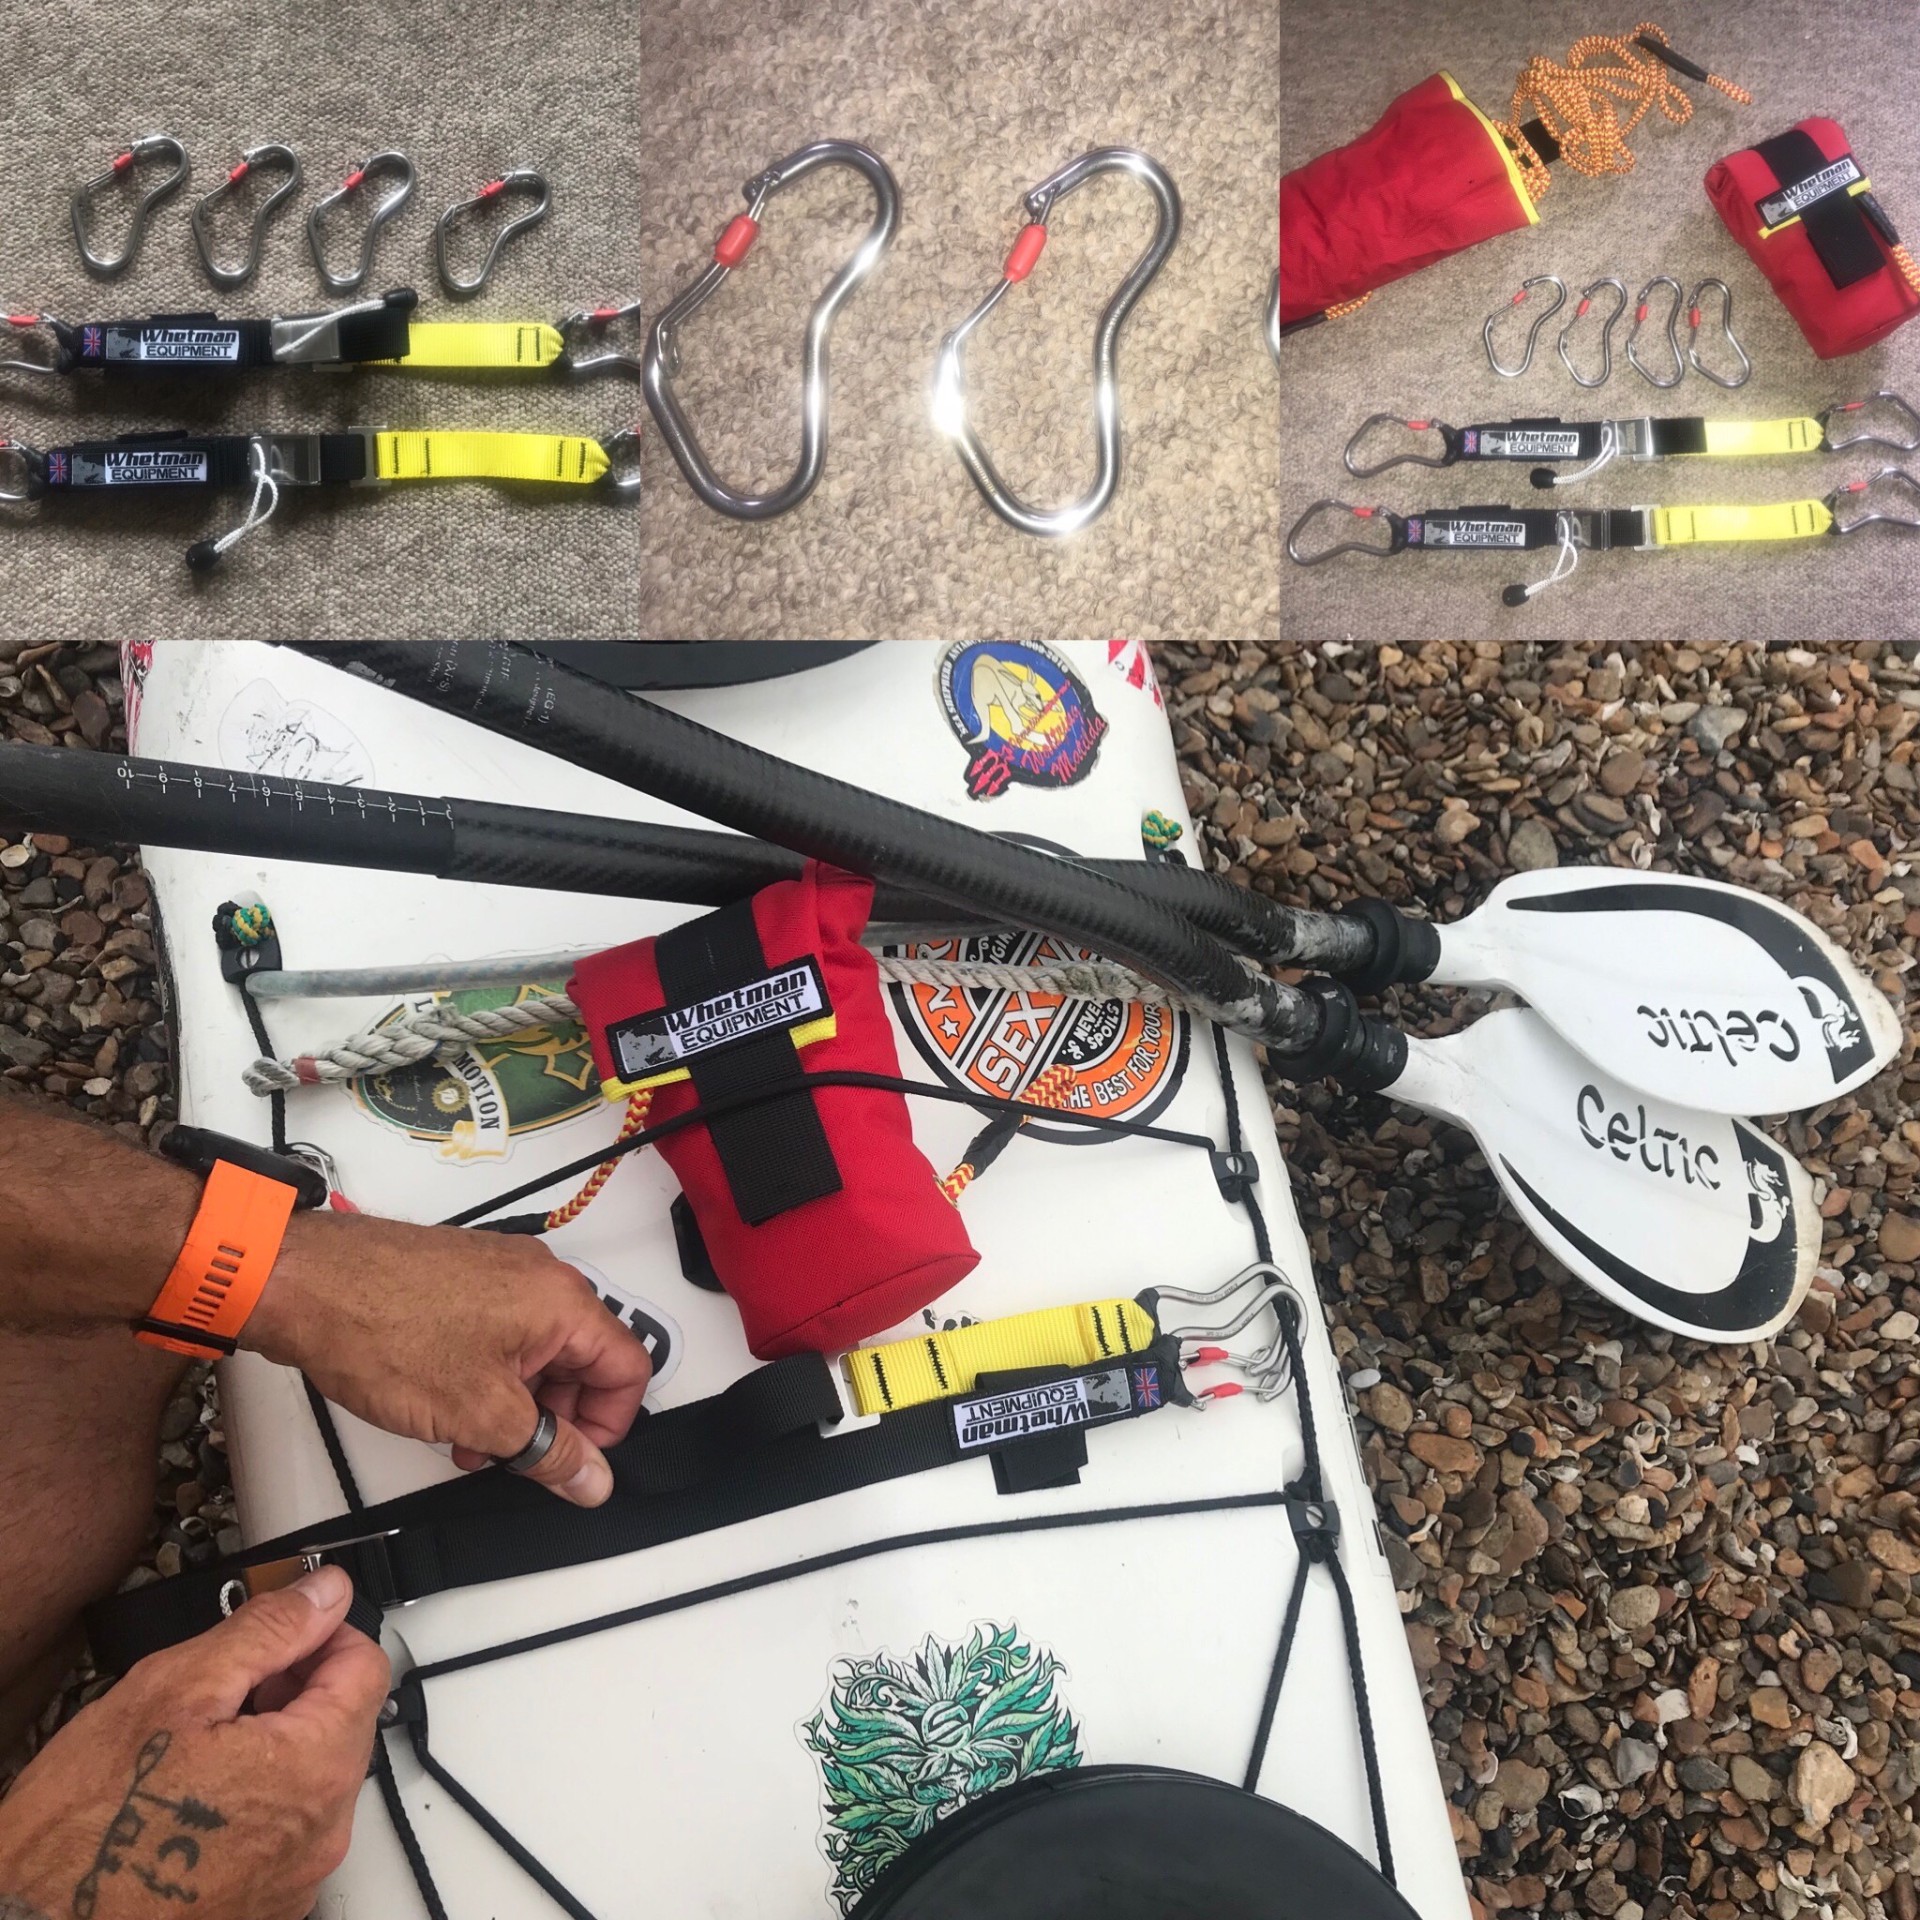 Some examples of safety equipment for sea kayakers.